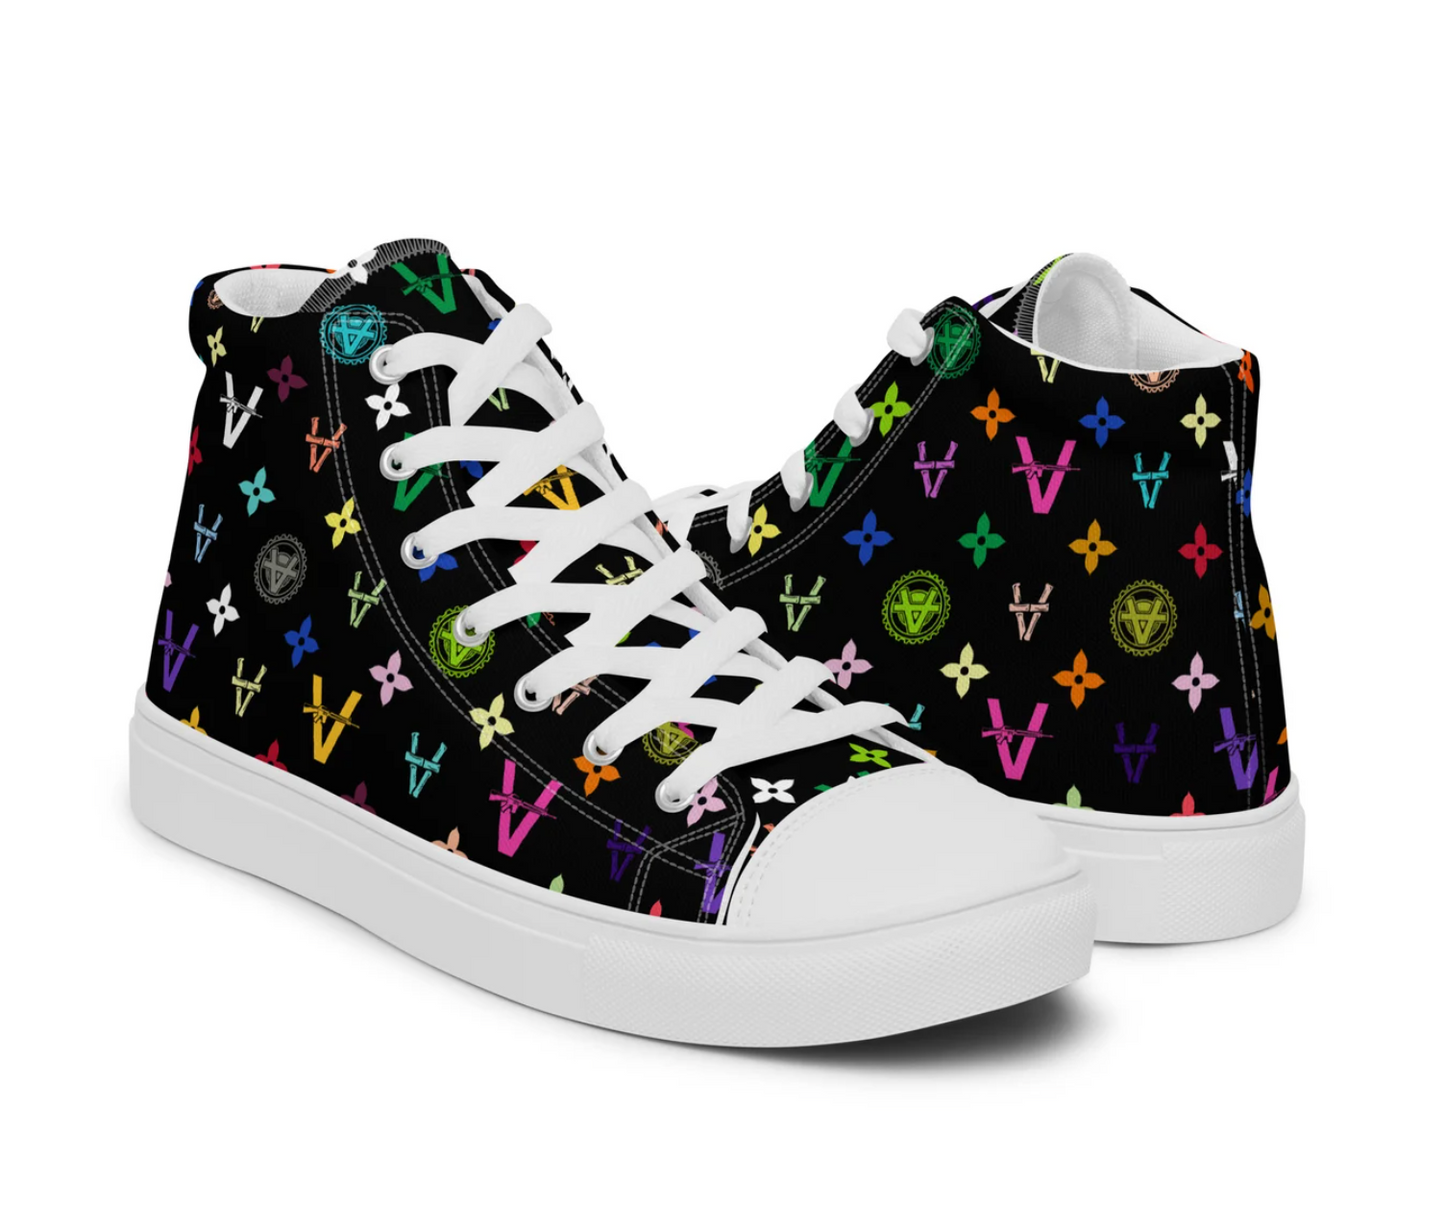 The Vandals High Top Sneaker for Men by Sergio Georgini